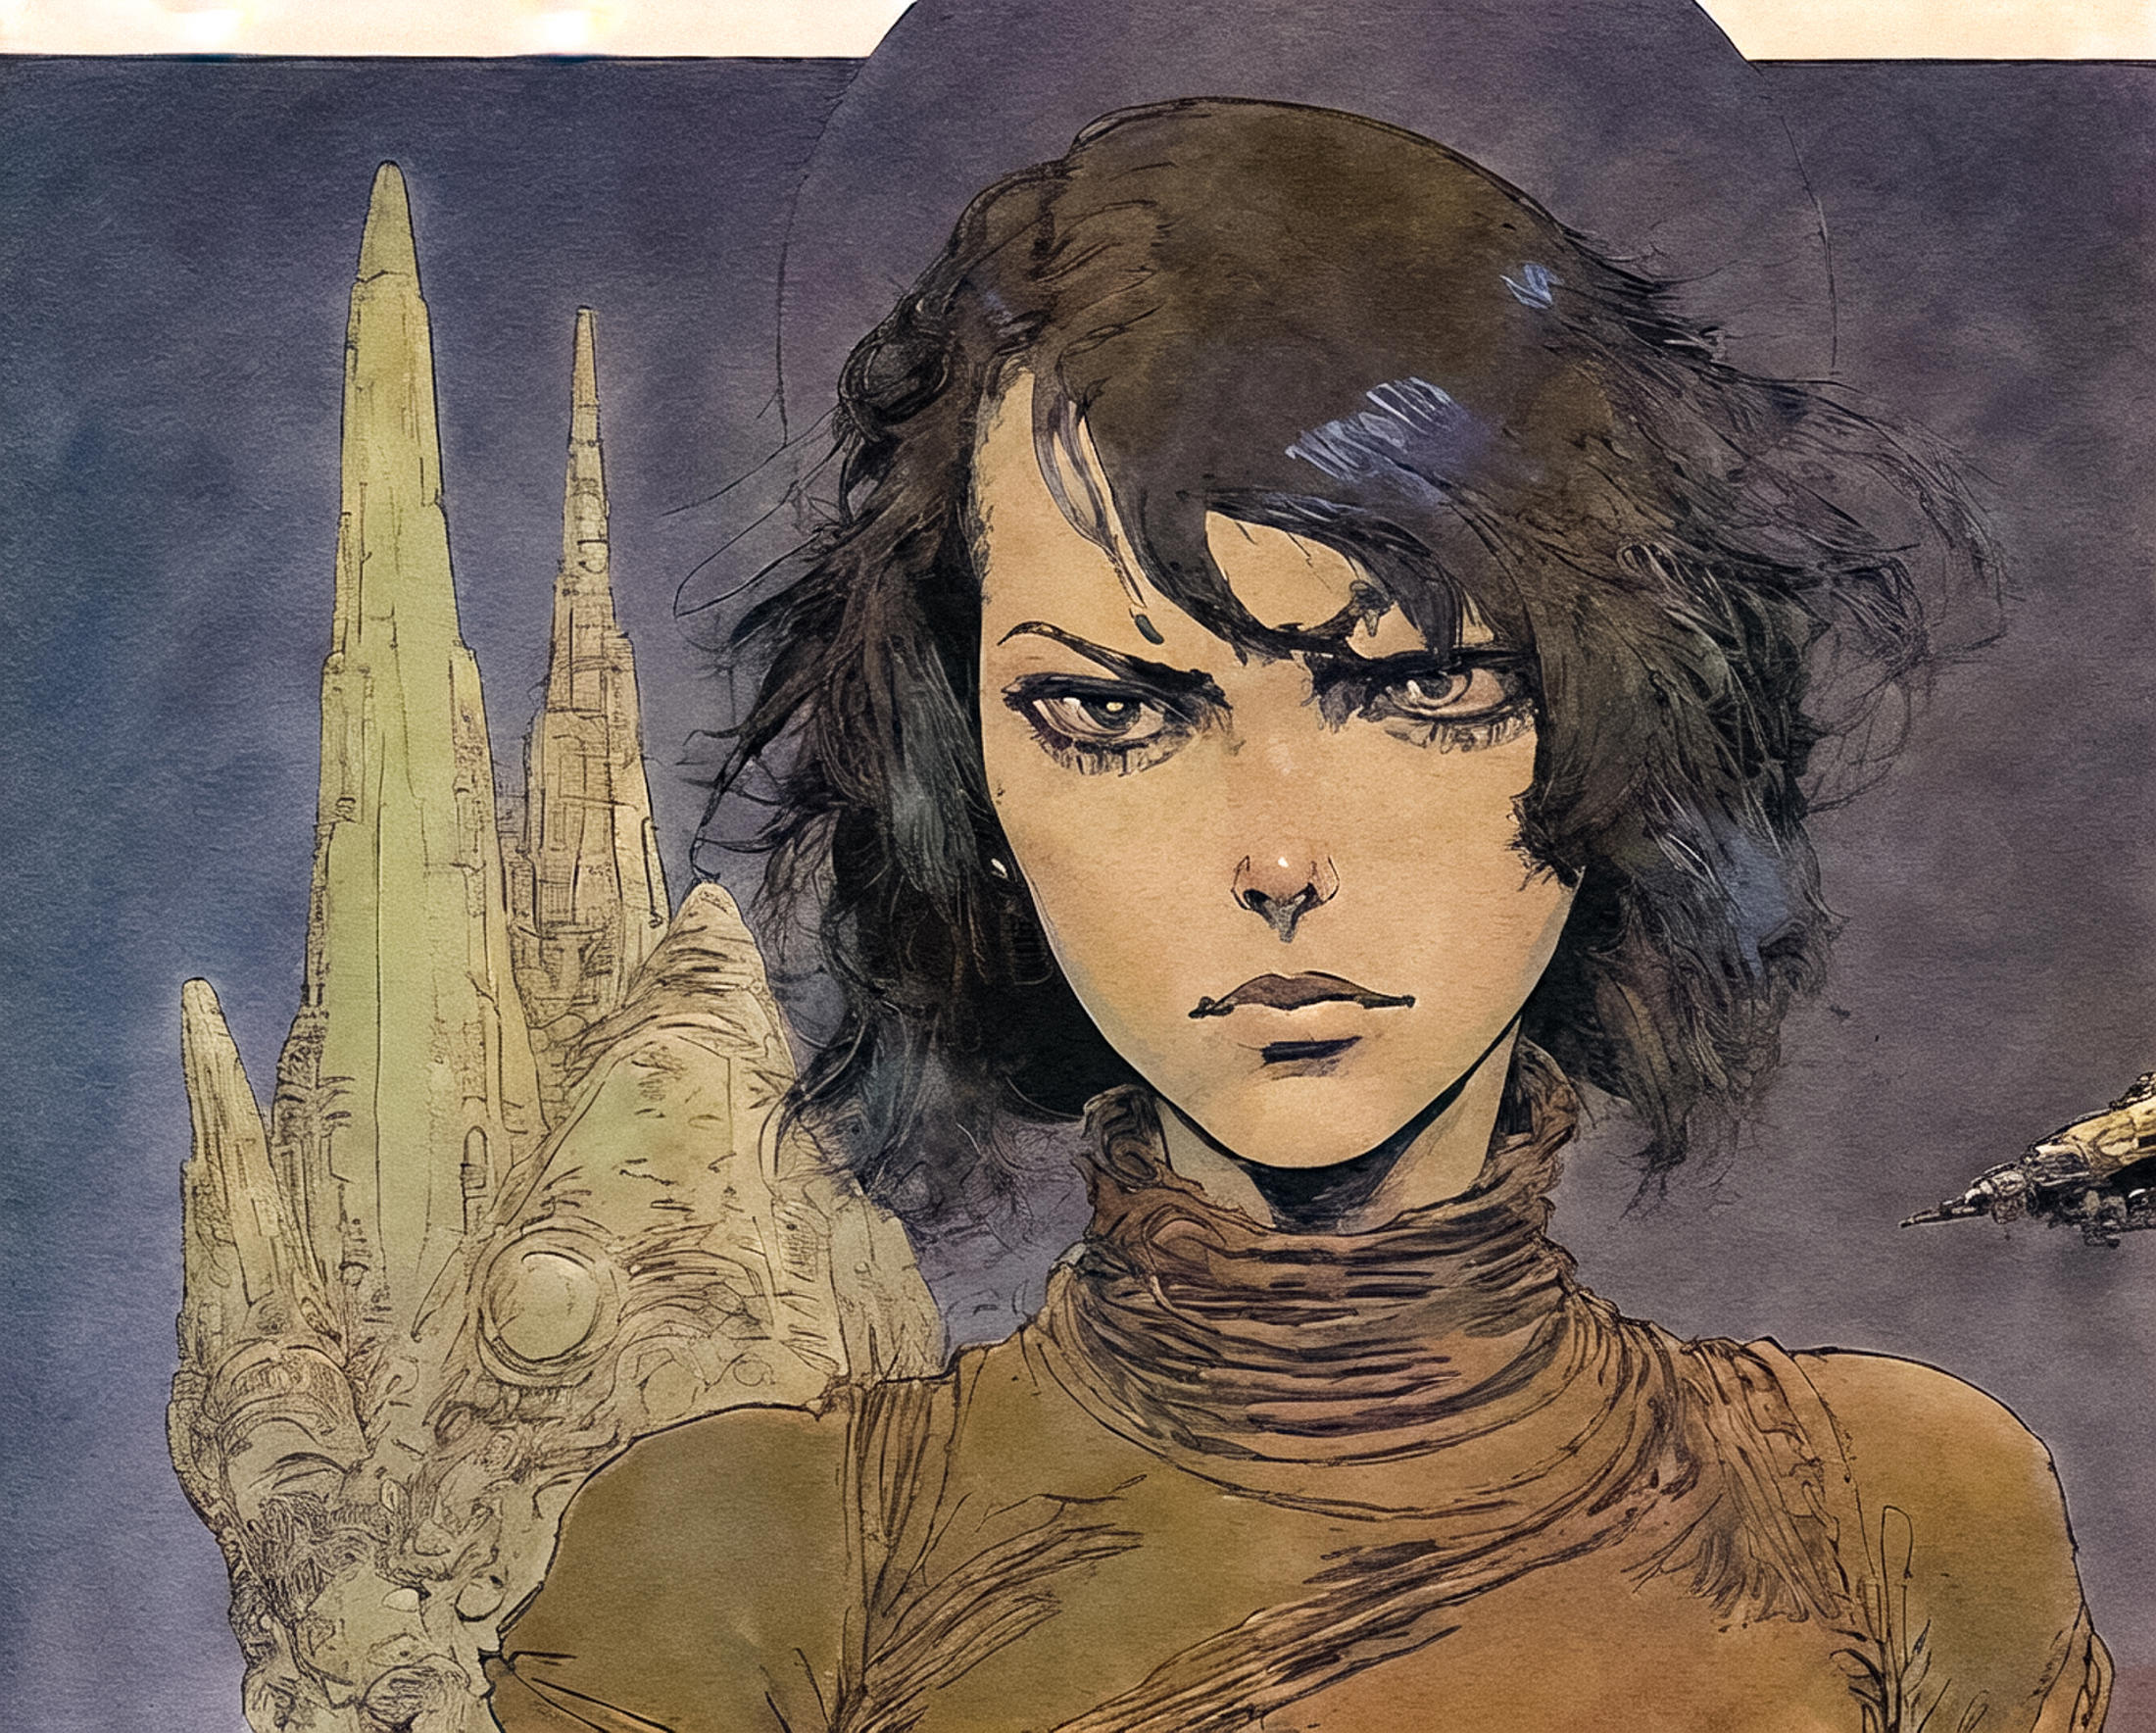 Woman with angry expression and black hair in a comic book style drawing.